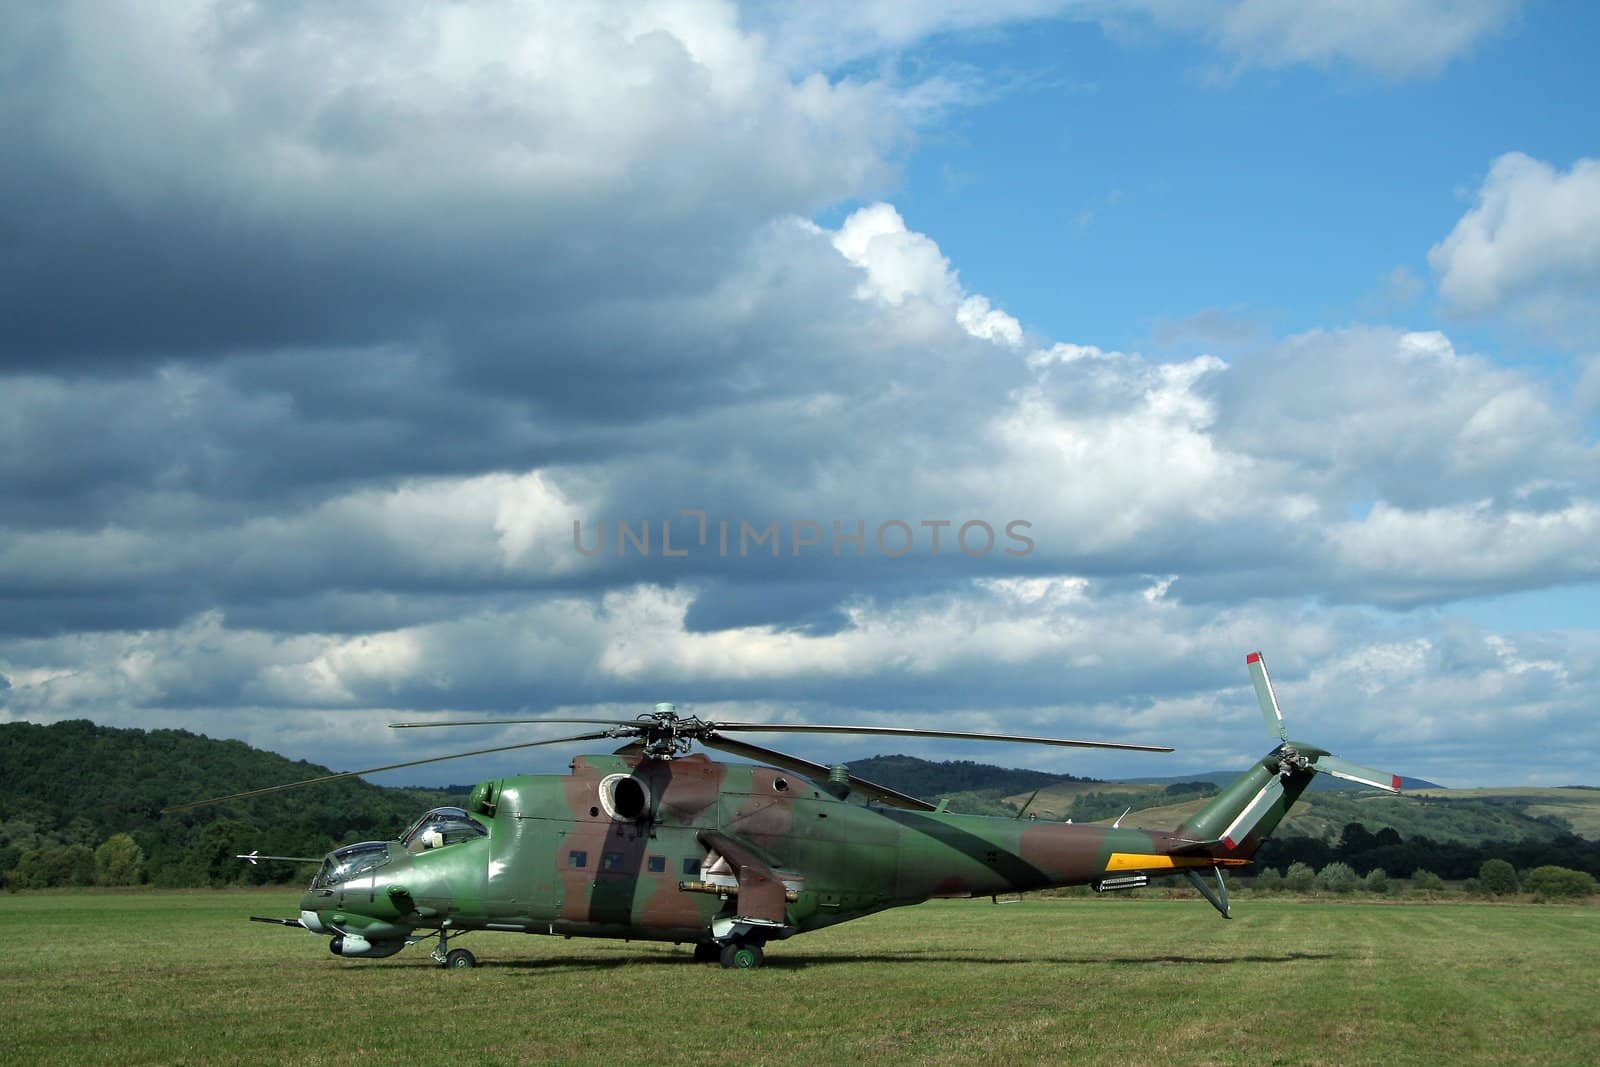 russian army helicopter, cloudy sky in background